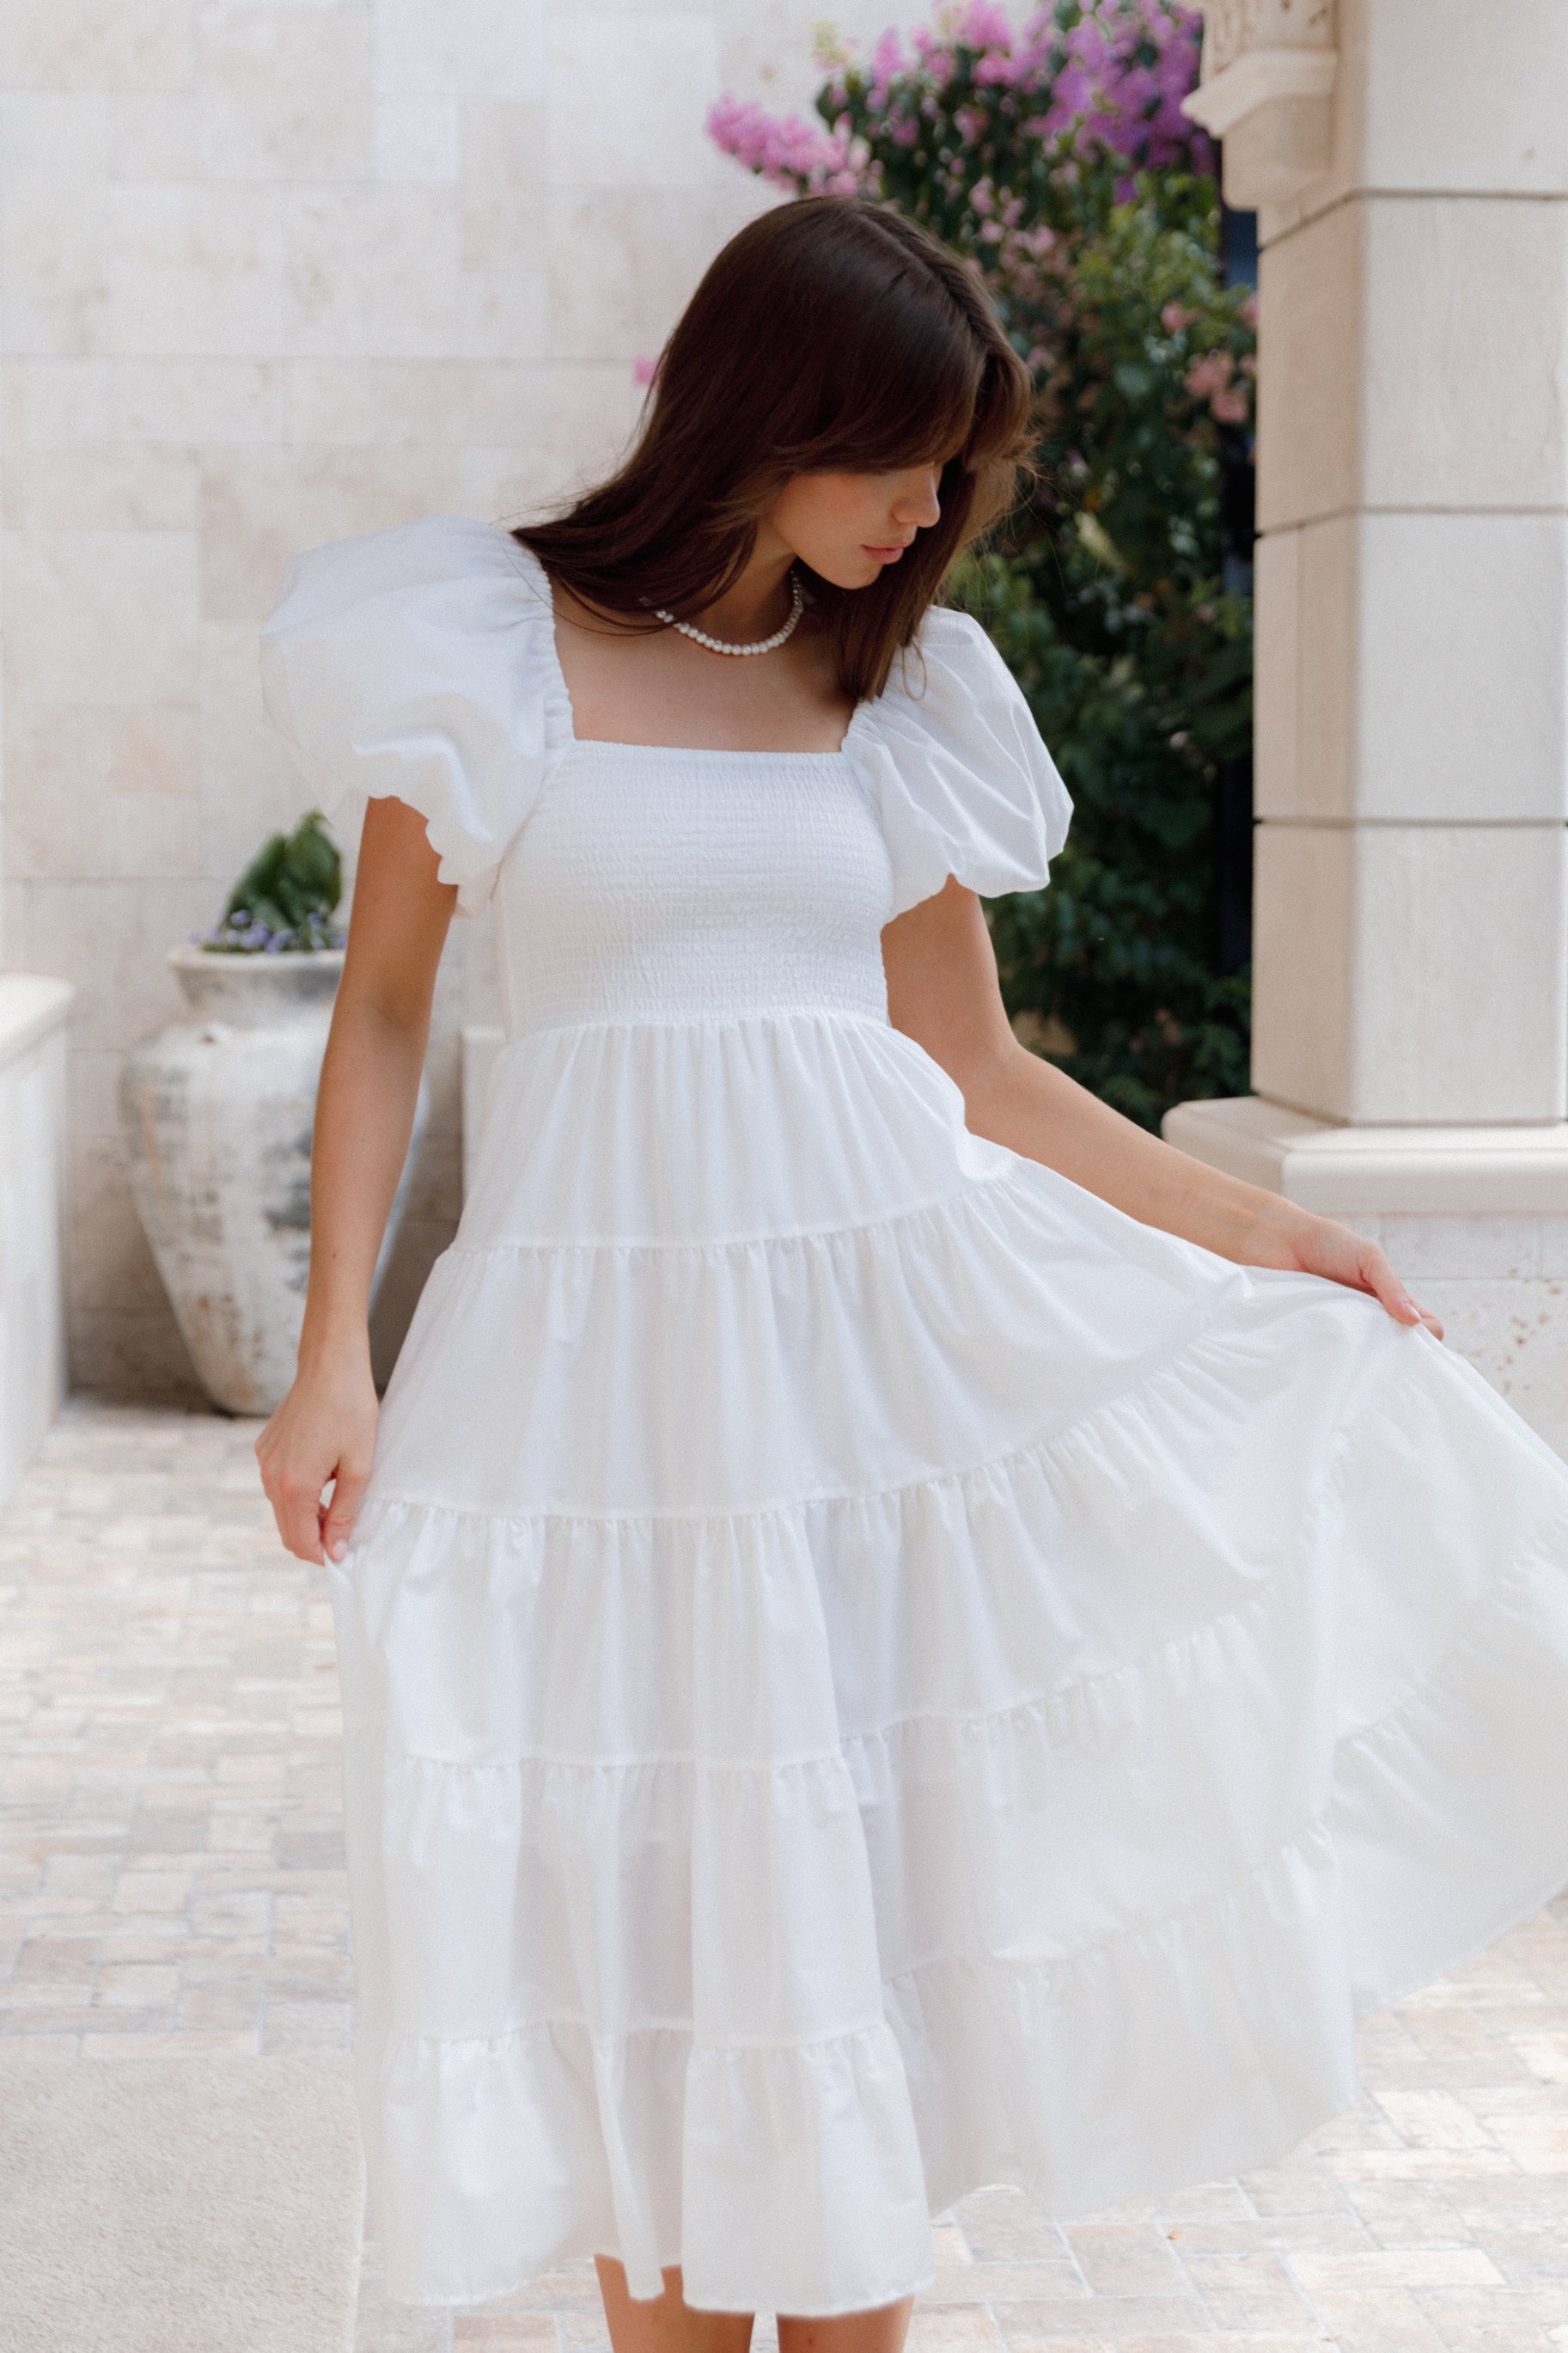 White Dresses  Unique Styles and Lengths for Any Occasion - Petal & Pup USA